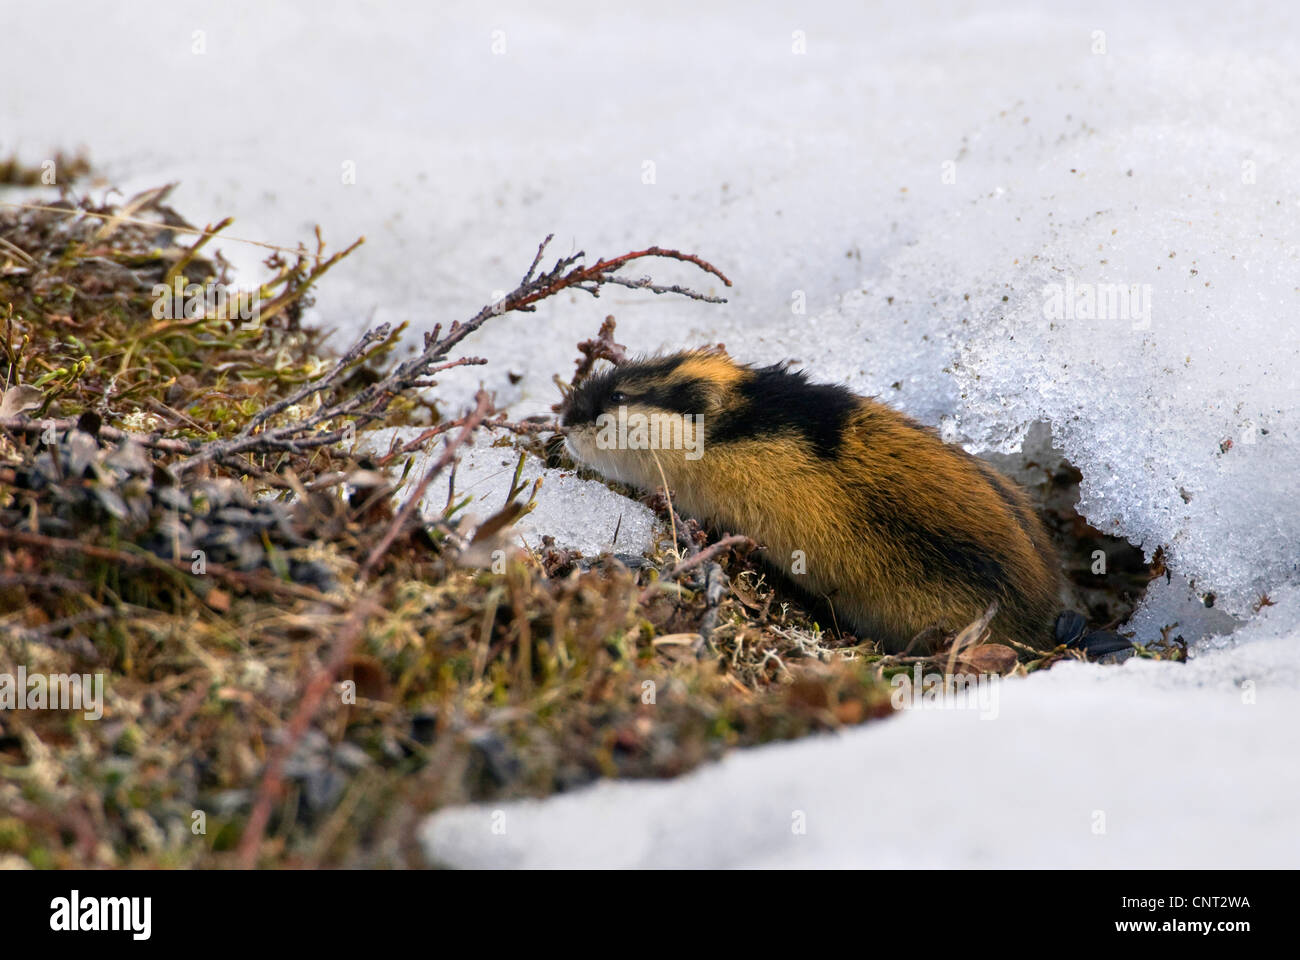 The Norway lemming is a small rodent that looks like a hamster. Lemmings  live in cold, snowy places in northern Europe, namely Norway. Discover more  about these clever mammals in All About